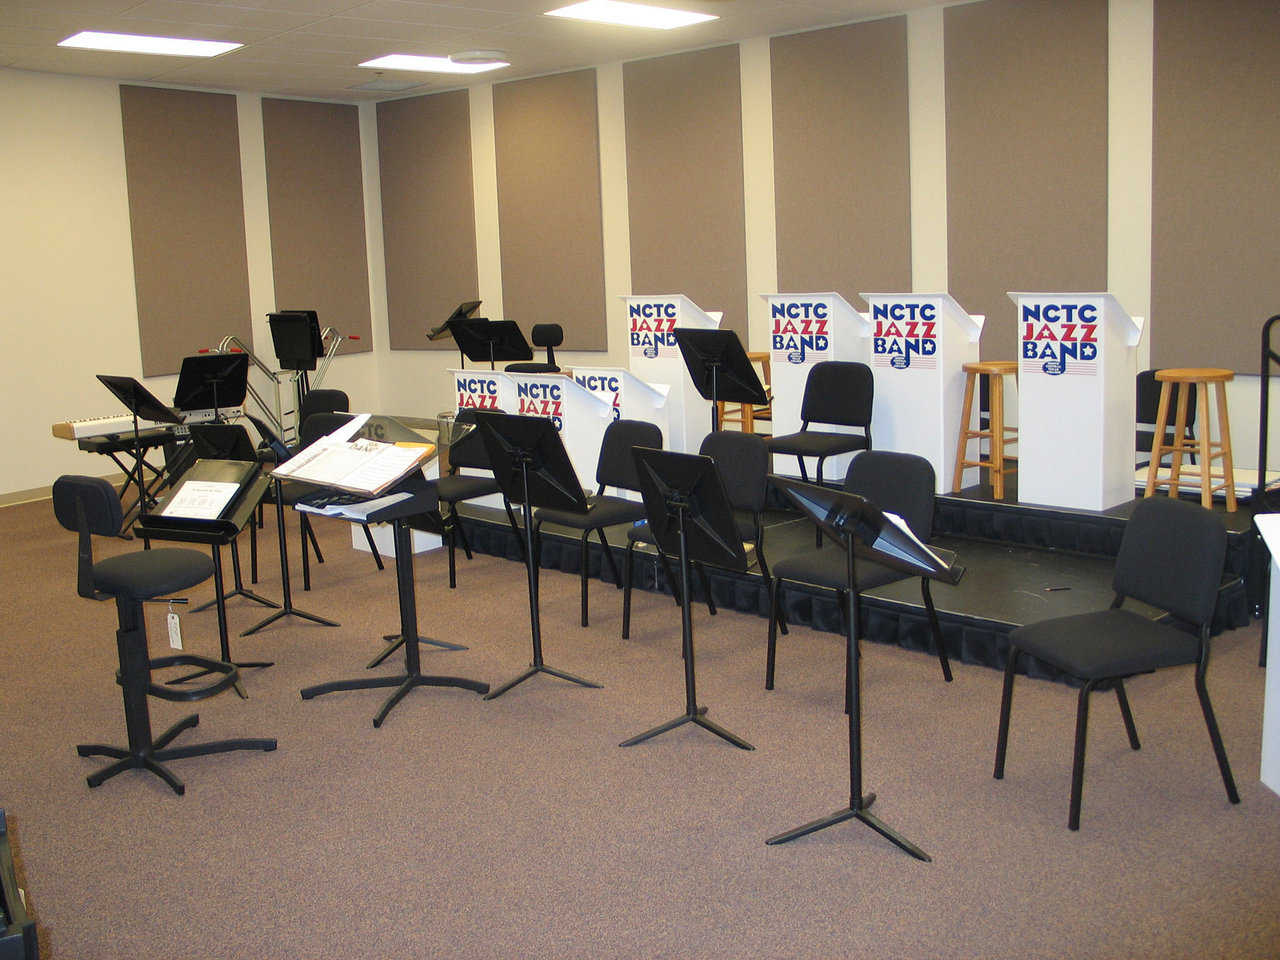 Rehearsal Room — Used for rehearsals of instrumental performances, this room includes Wenger equipment.